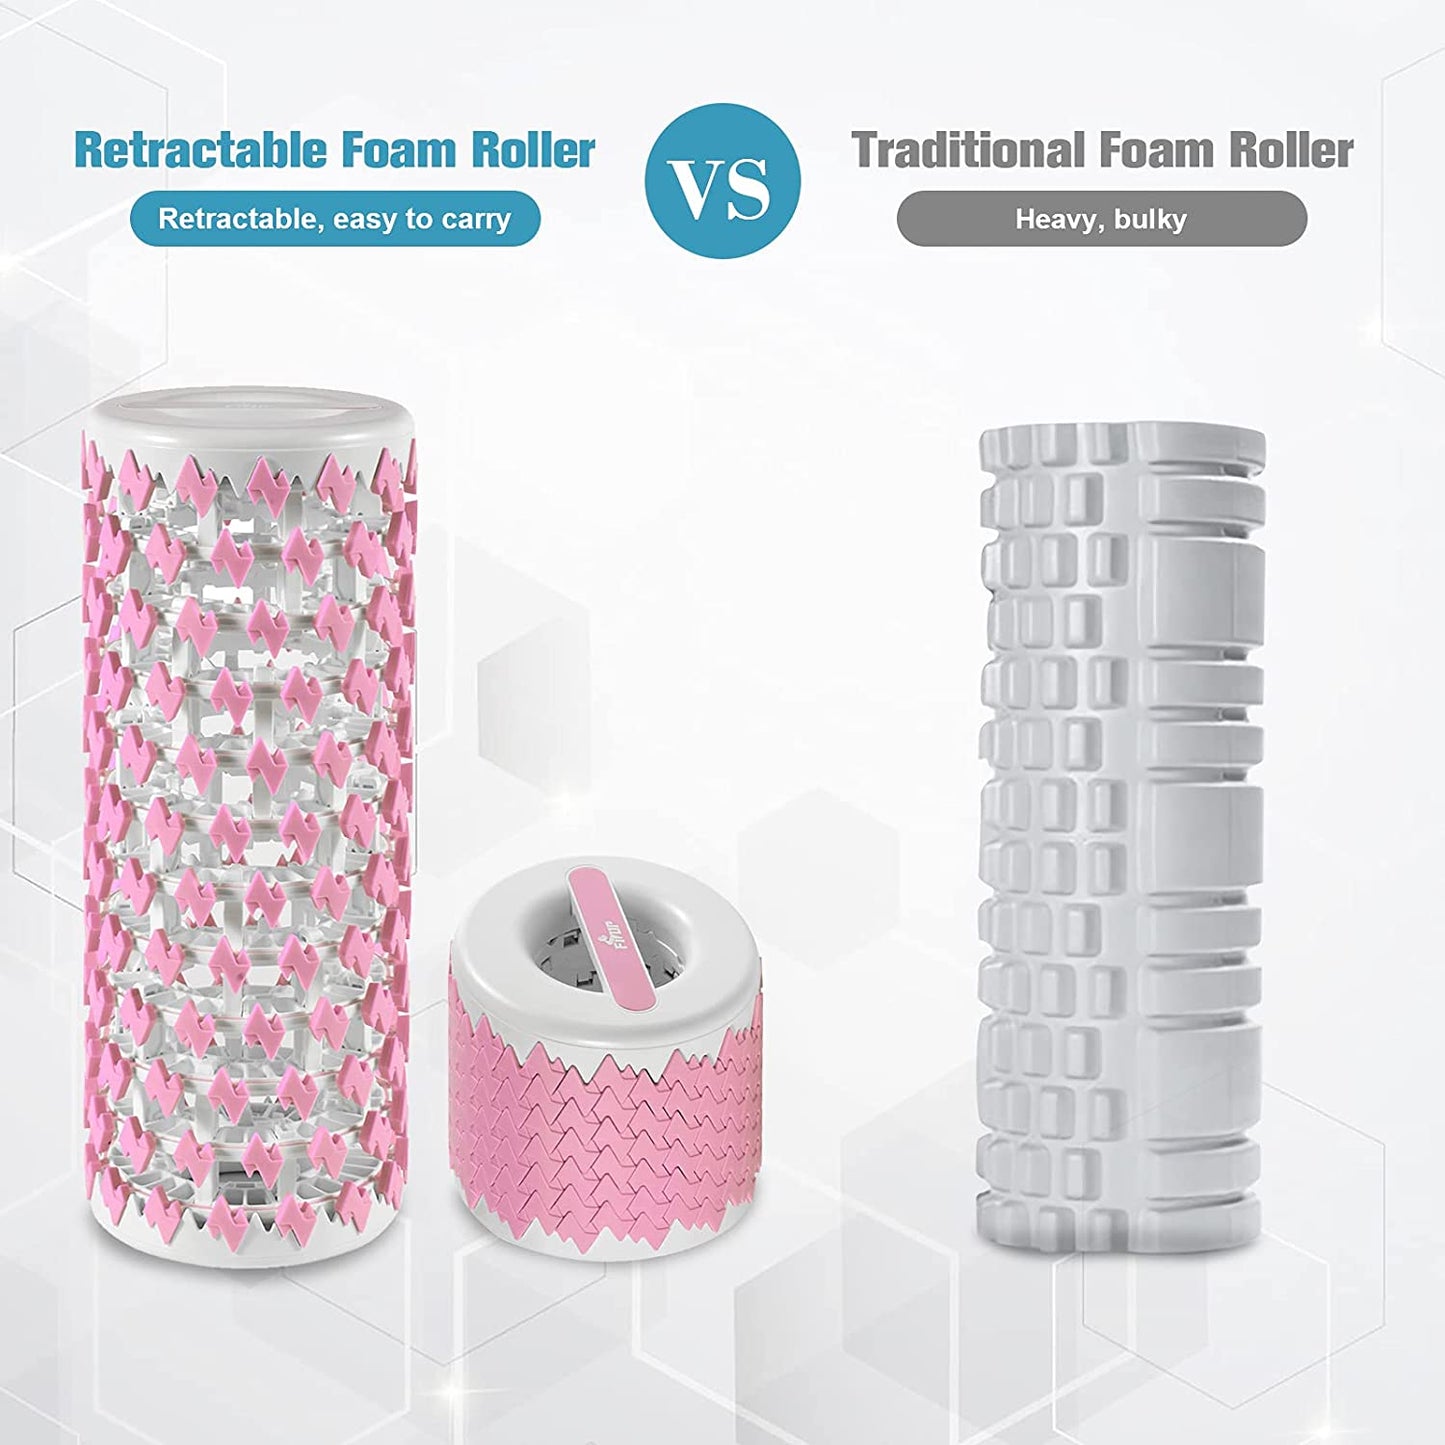 FISUP Foam Roller For Physical Therapy And Exercise Back Stretching Adjustable Deep Tissue Massager For Home Gym Pink